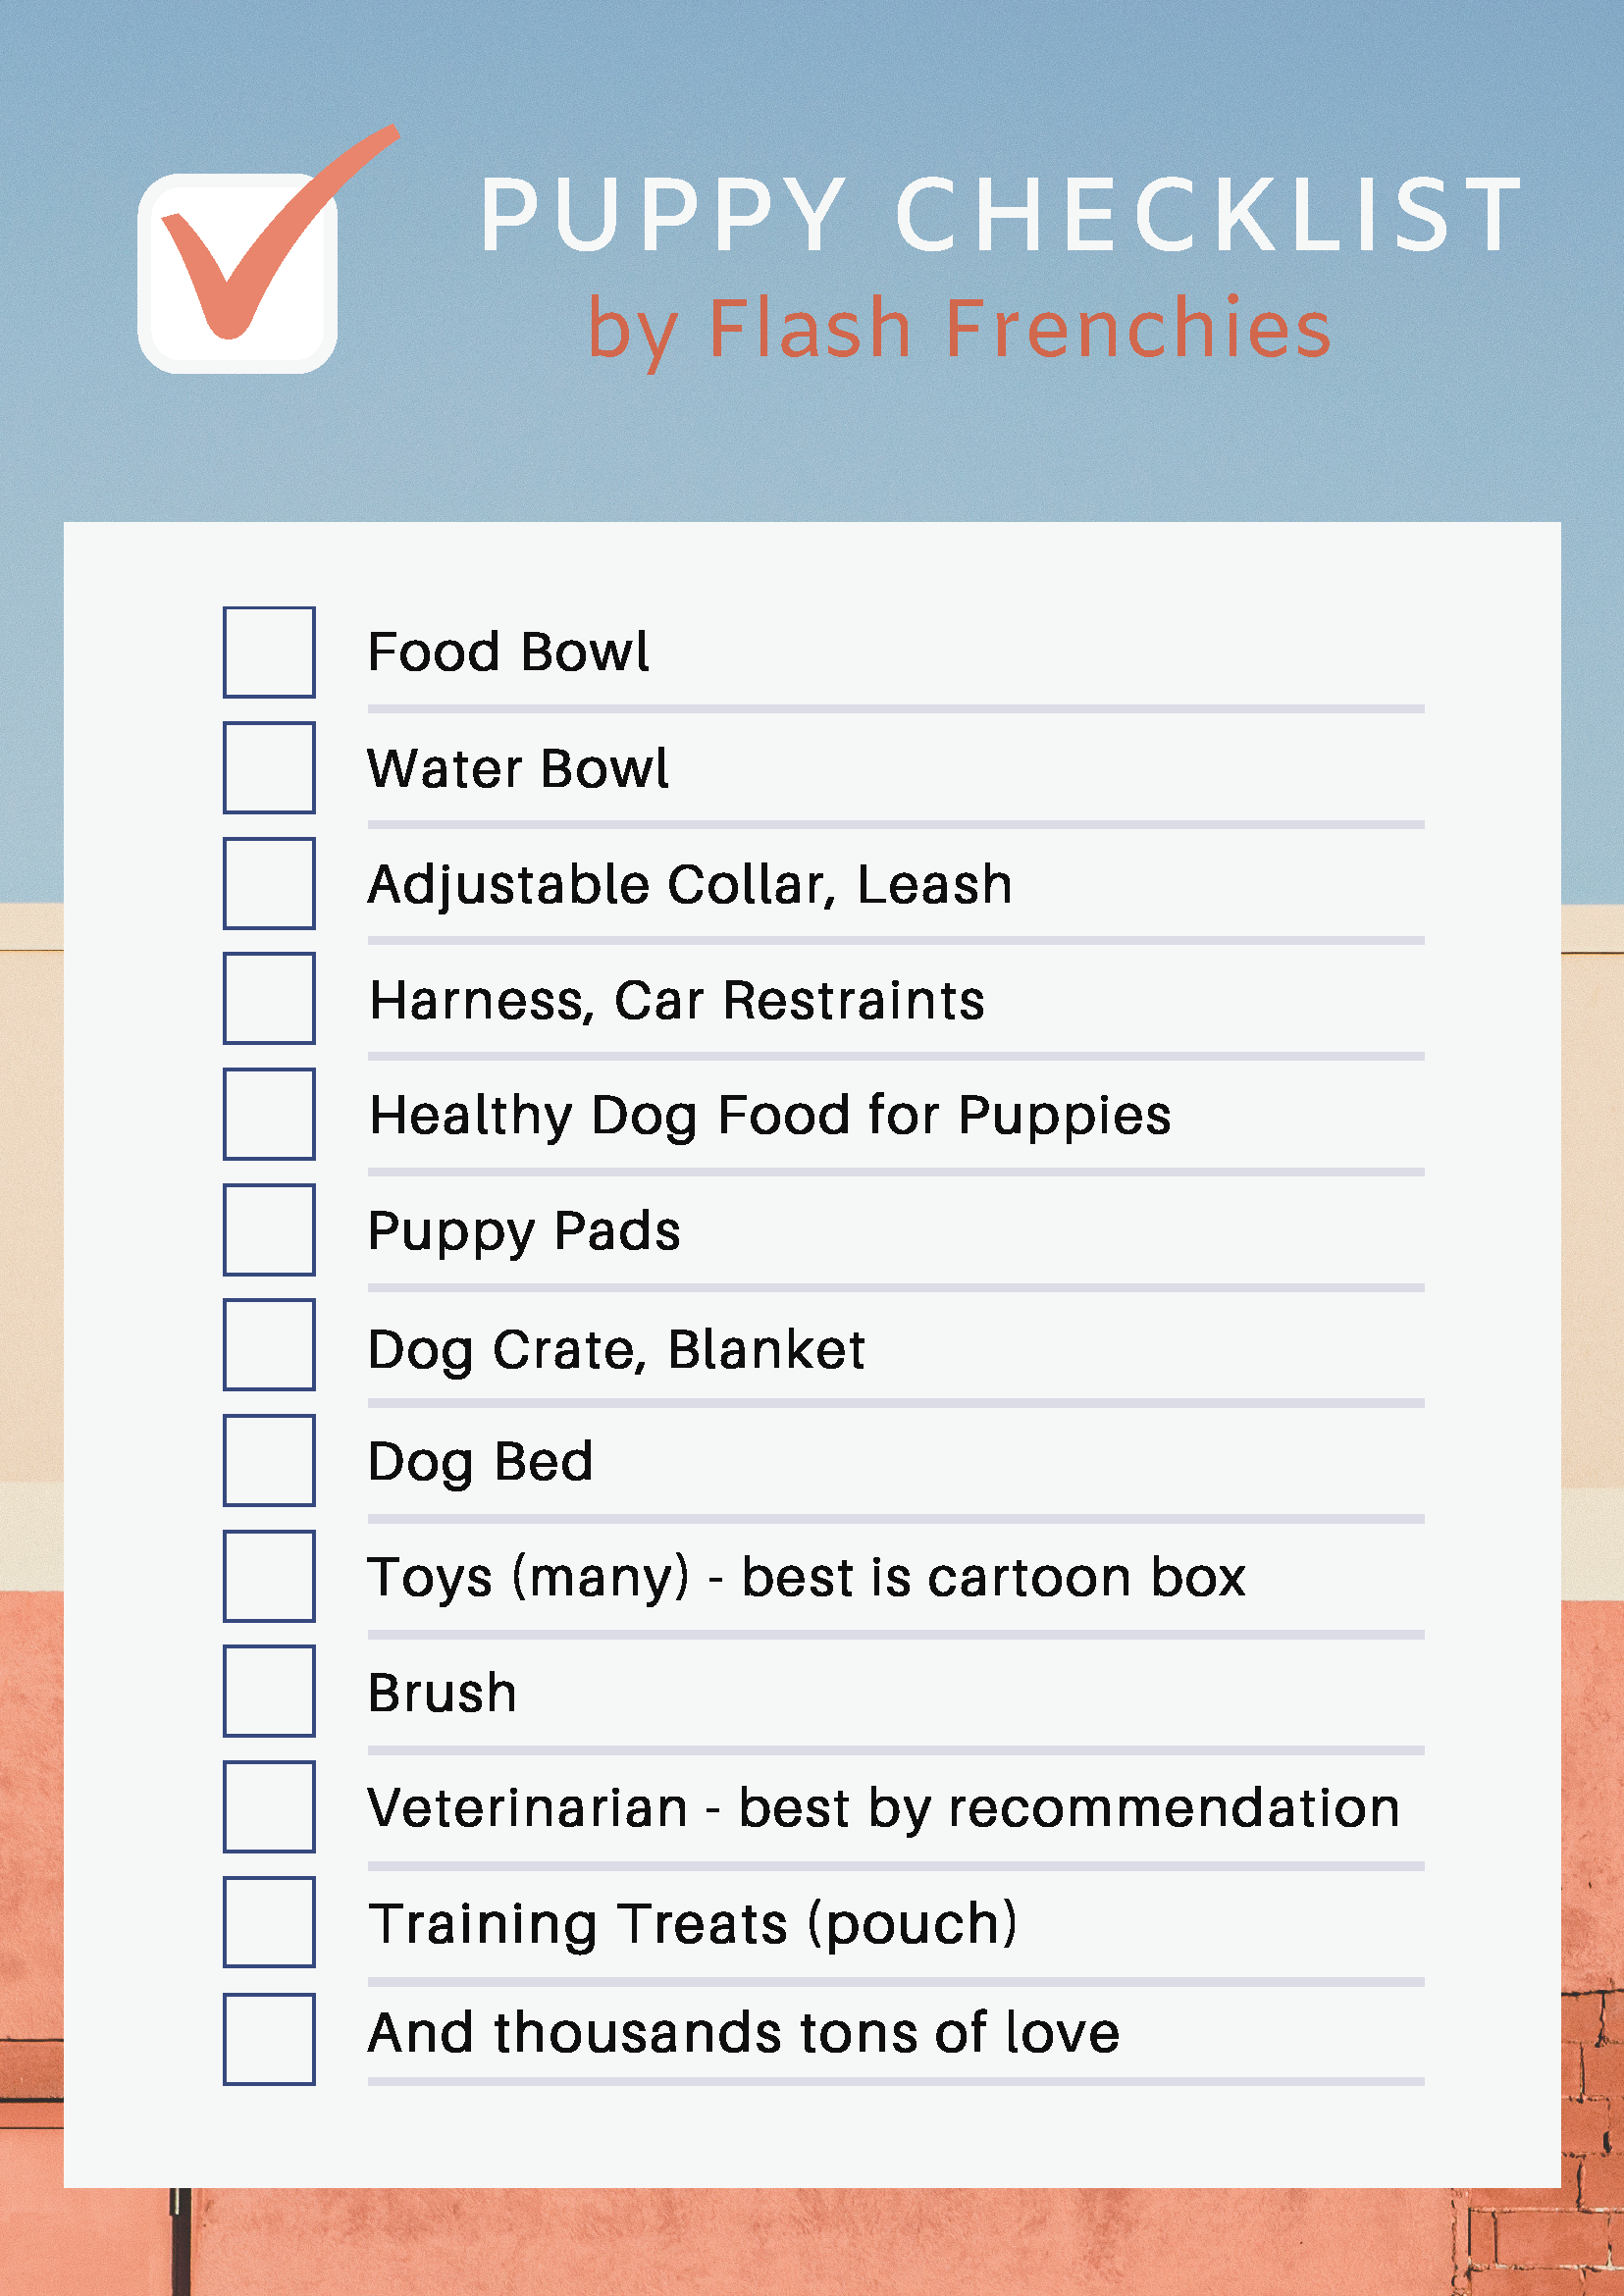 Puppy Checklist by Flash Frenchies